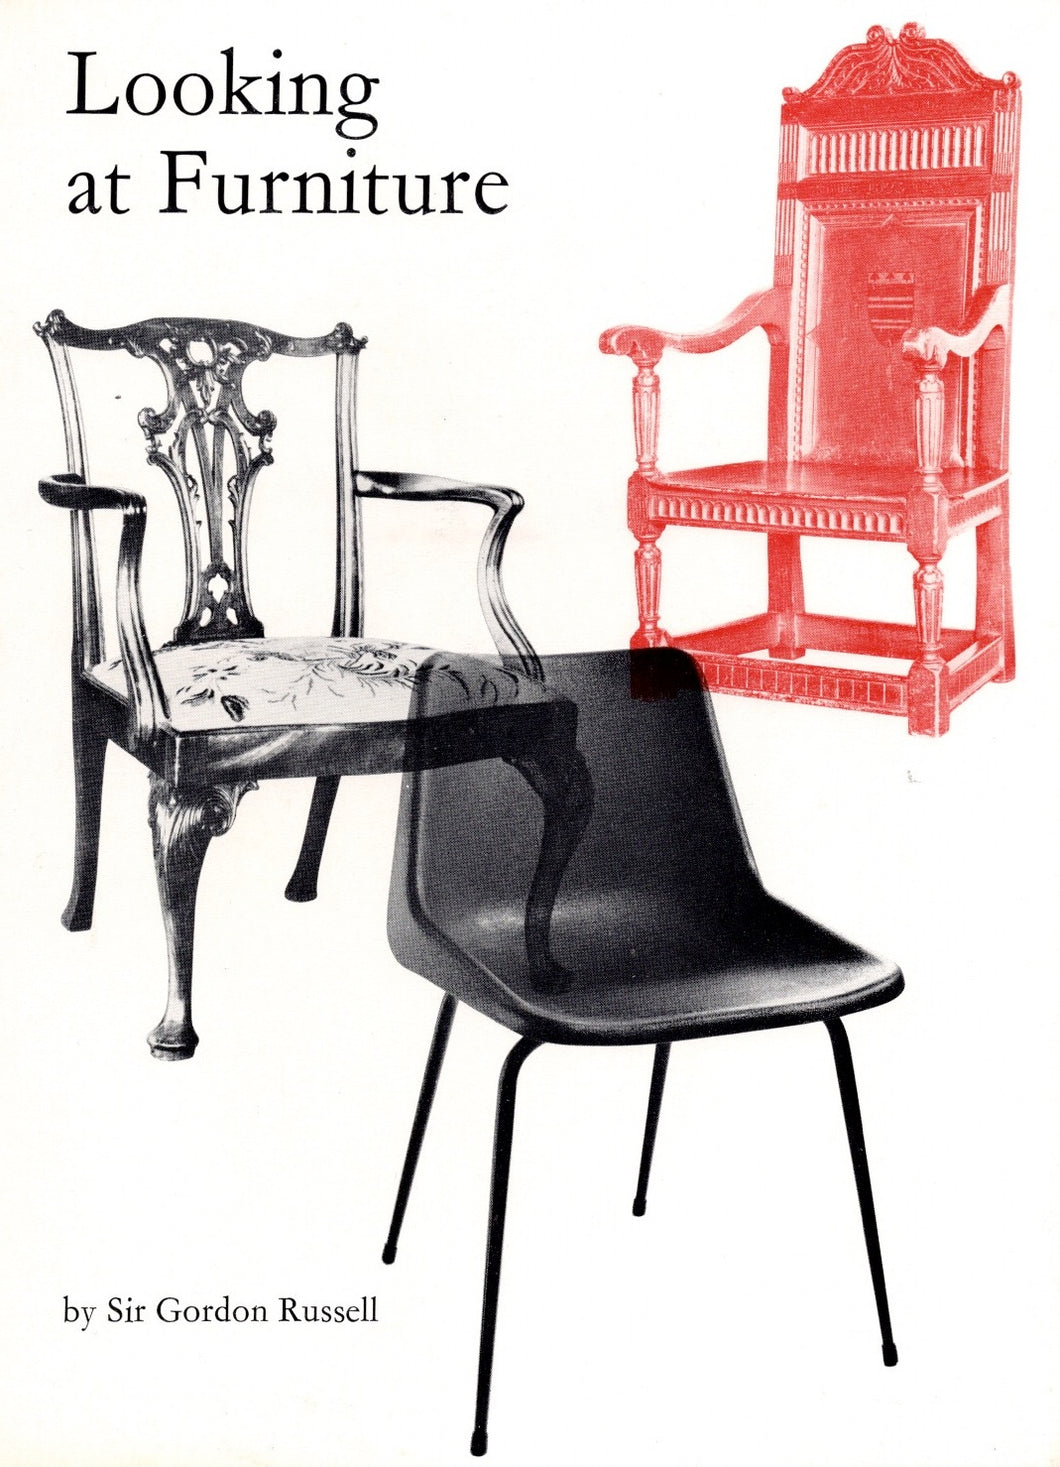 Looking at Furniture by Sir Gordon Russell